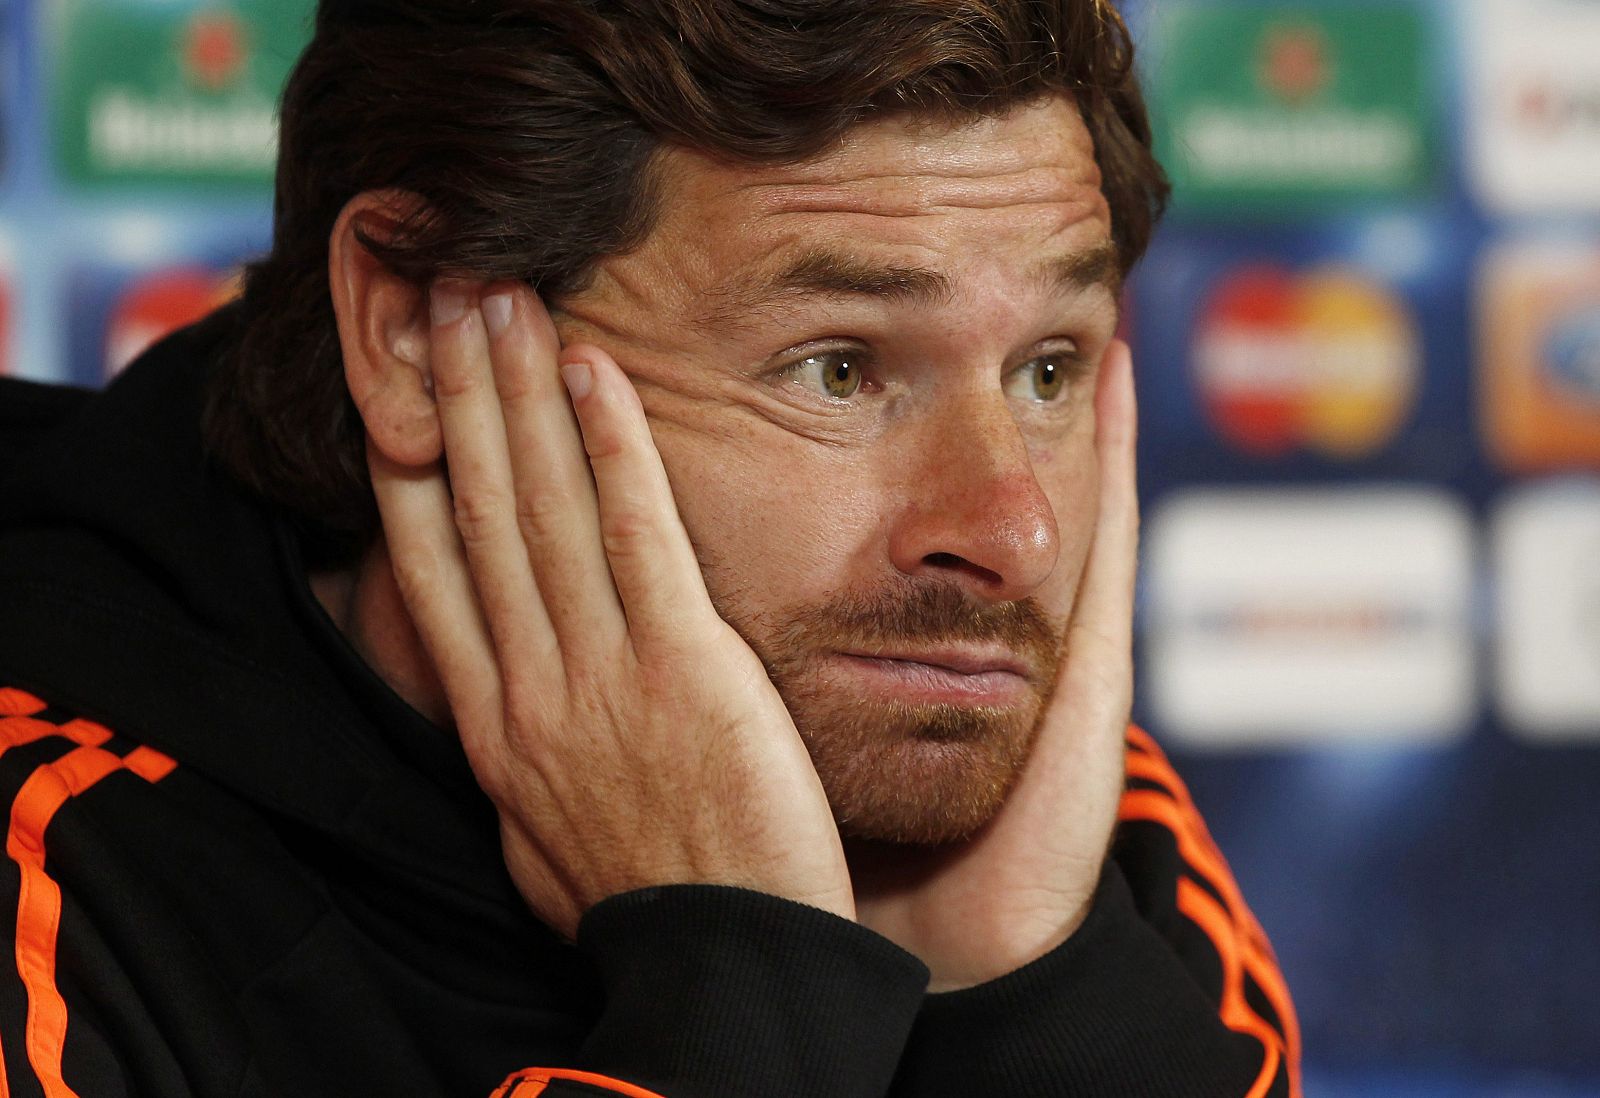 File photo of Chelsea's coach Andre Villas-Boas at a news conference at their training ground in Cobham